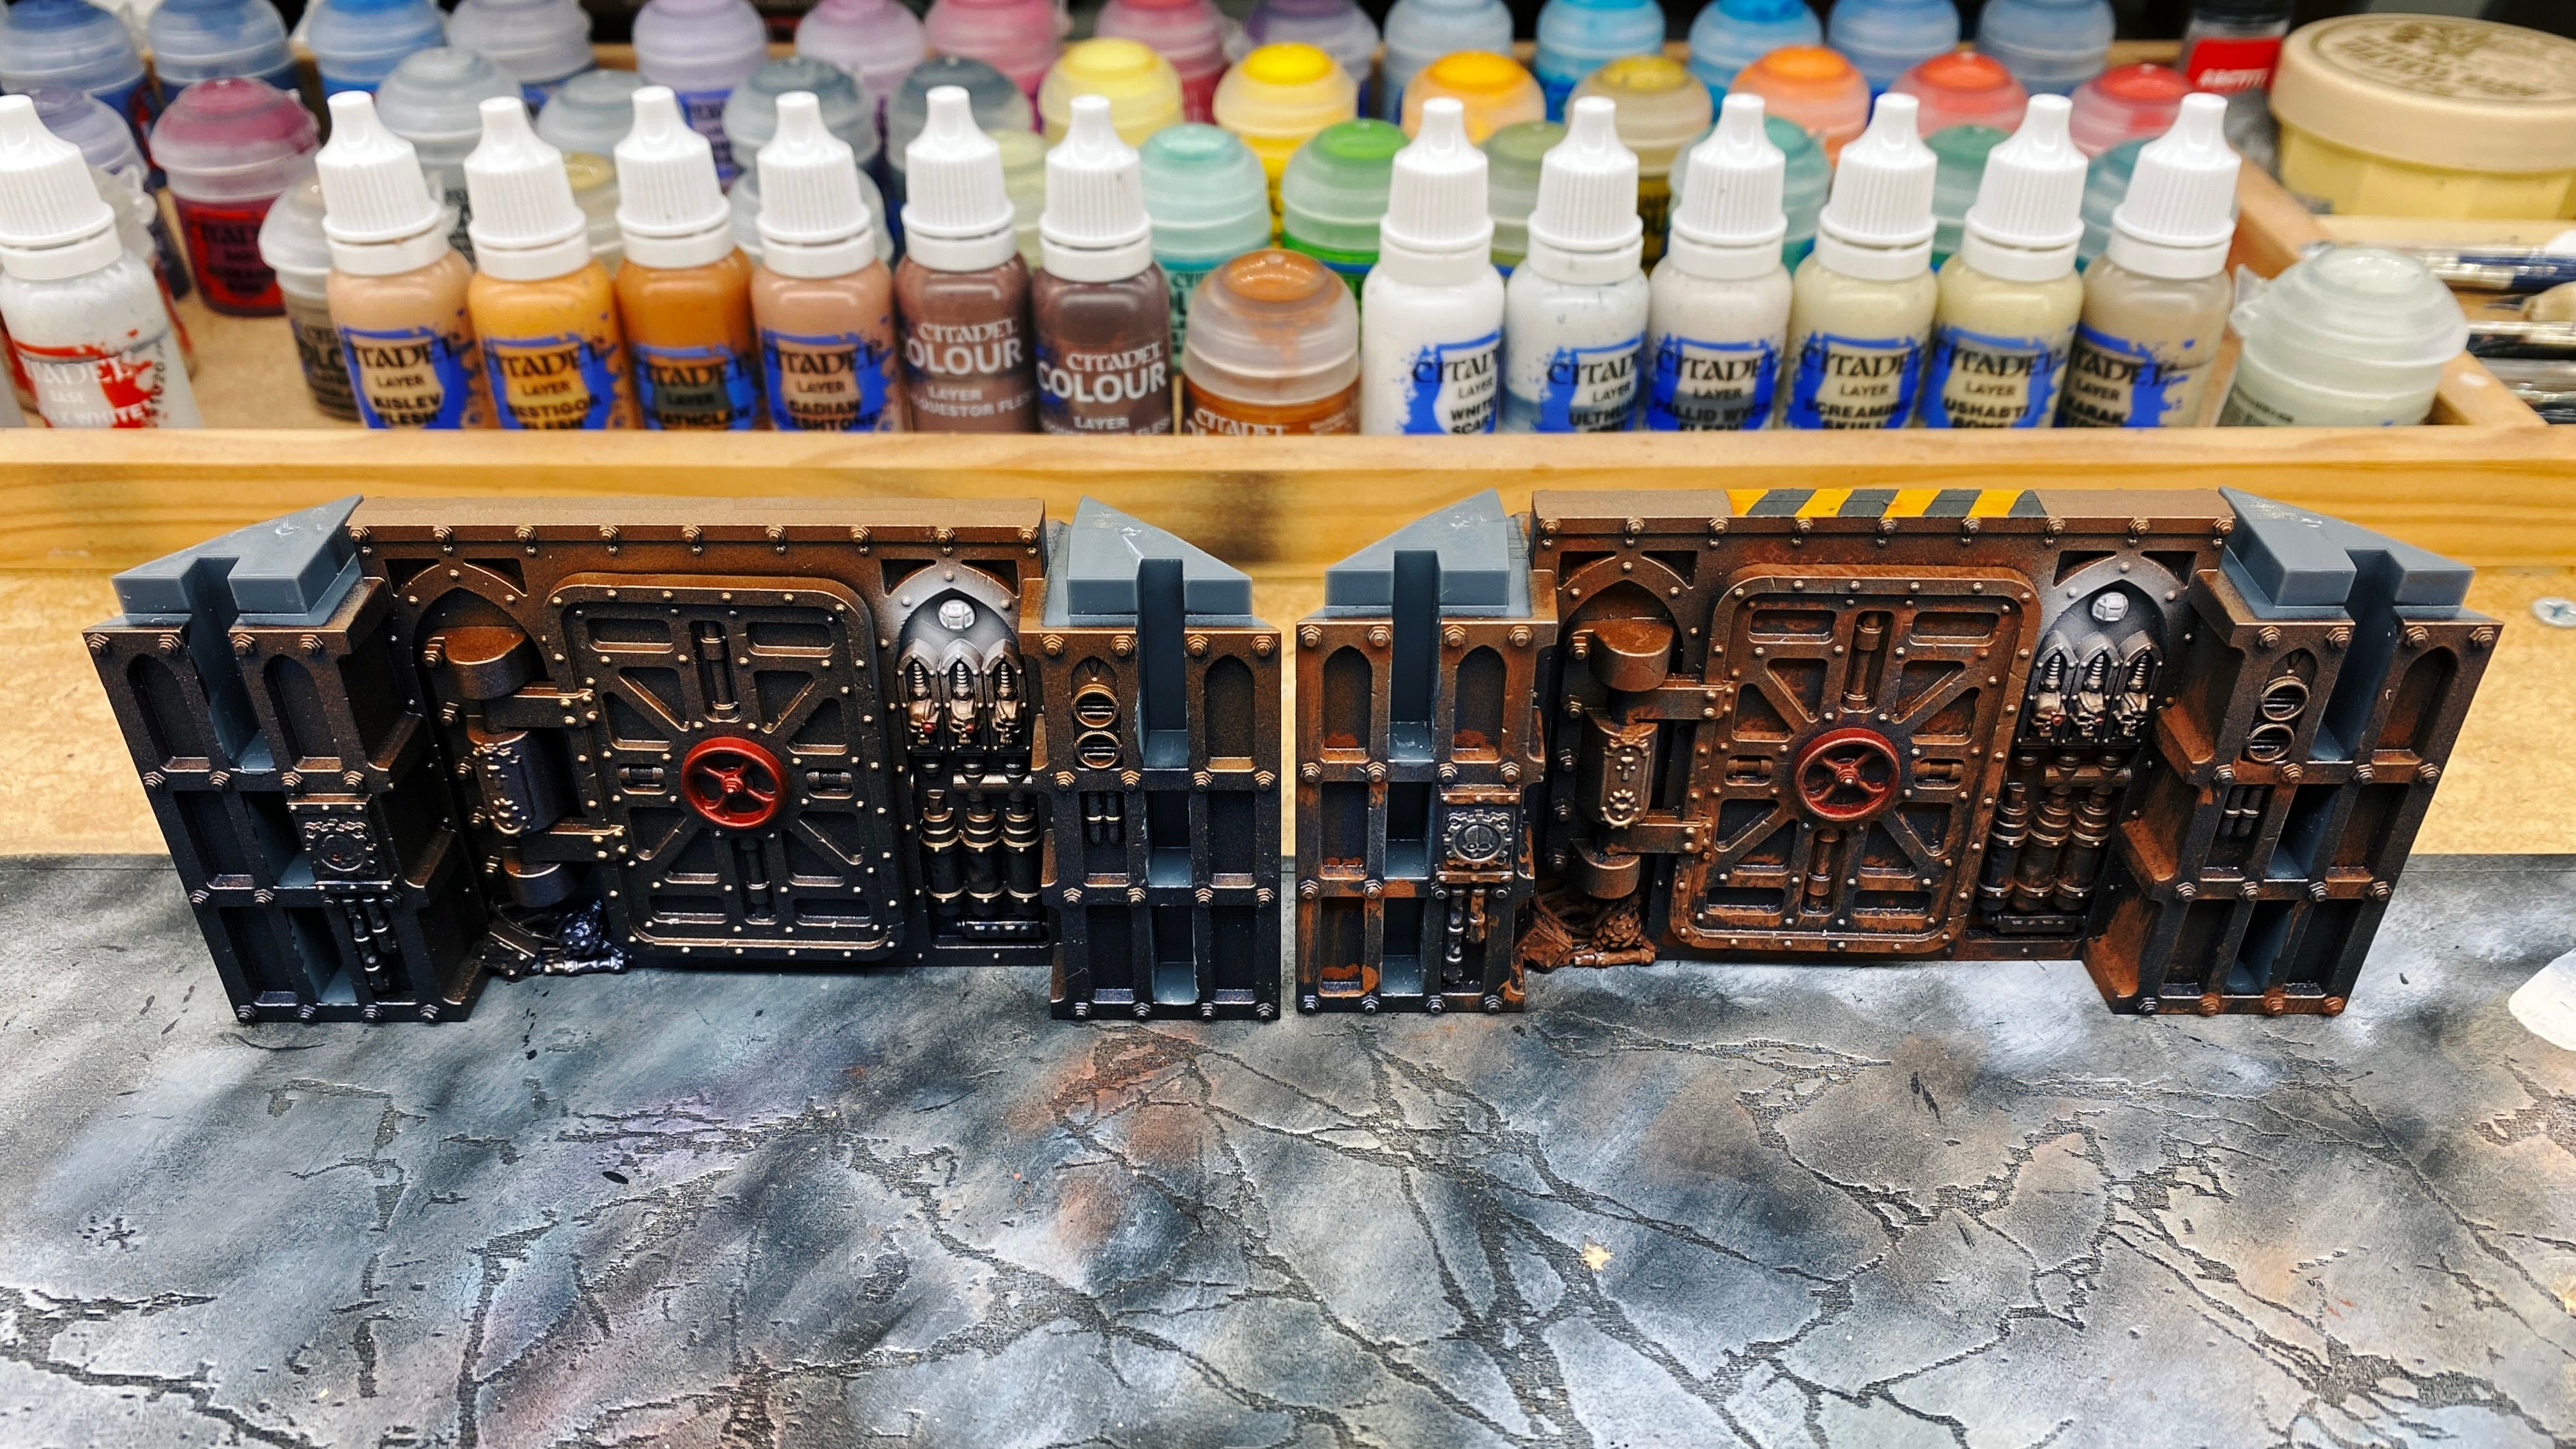 A photo of two of the sections of the wall terrain from Into The Dark. It looks very steampunk with lots of pipes and skulls and both are painted the lower colour being a dark metallic blue and further up the wall it fades into a lighter copper colour. The section on the left looks almost unfinished compared to the one on the right, that looks a lot more "lived in".